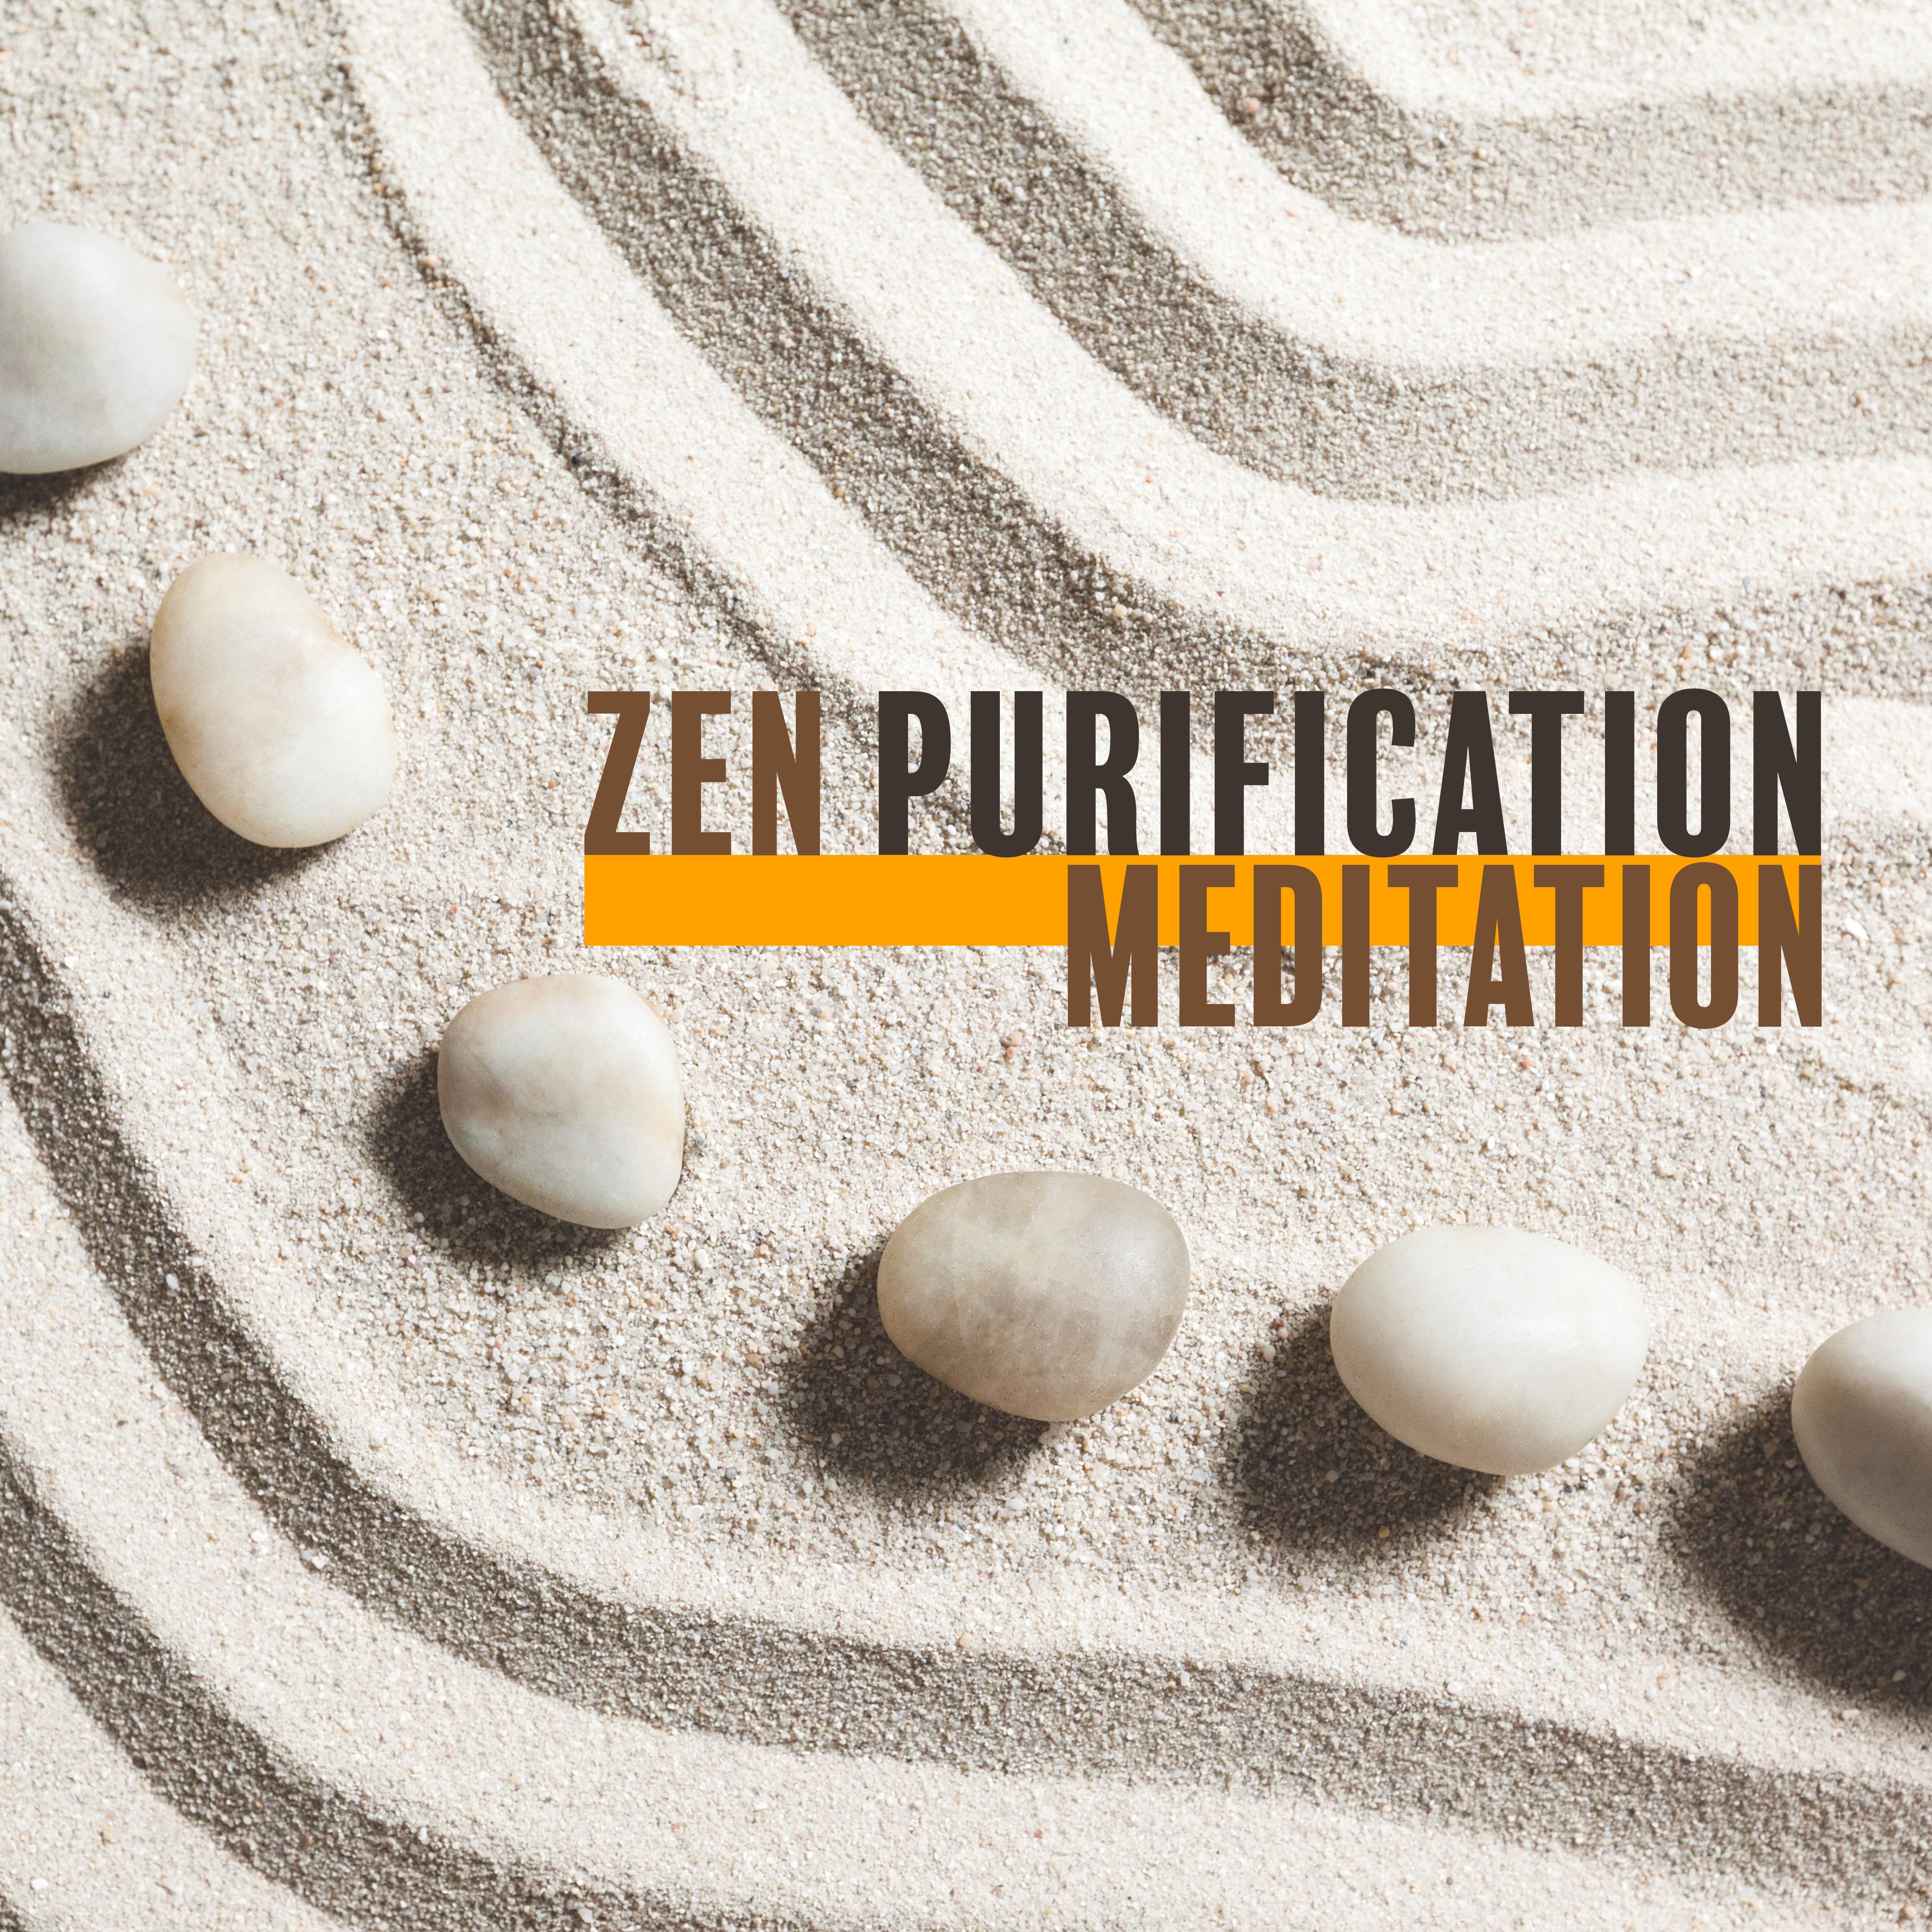 Zen Purification Meditation  Selection of 2019 New Age Music for Deepest Yoga Experience, Journey into Yourself, Open Your Body  Mind, Third Eye Meditation, Chakra Balancing